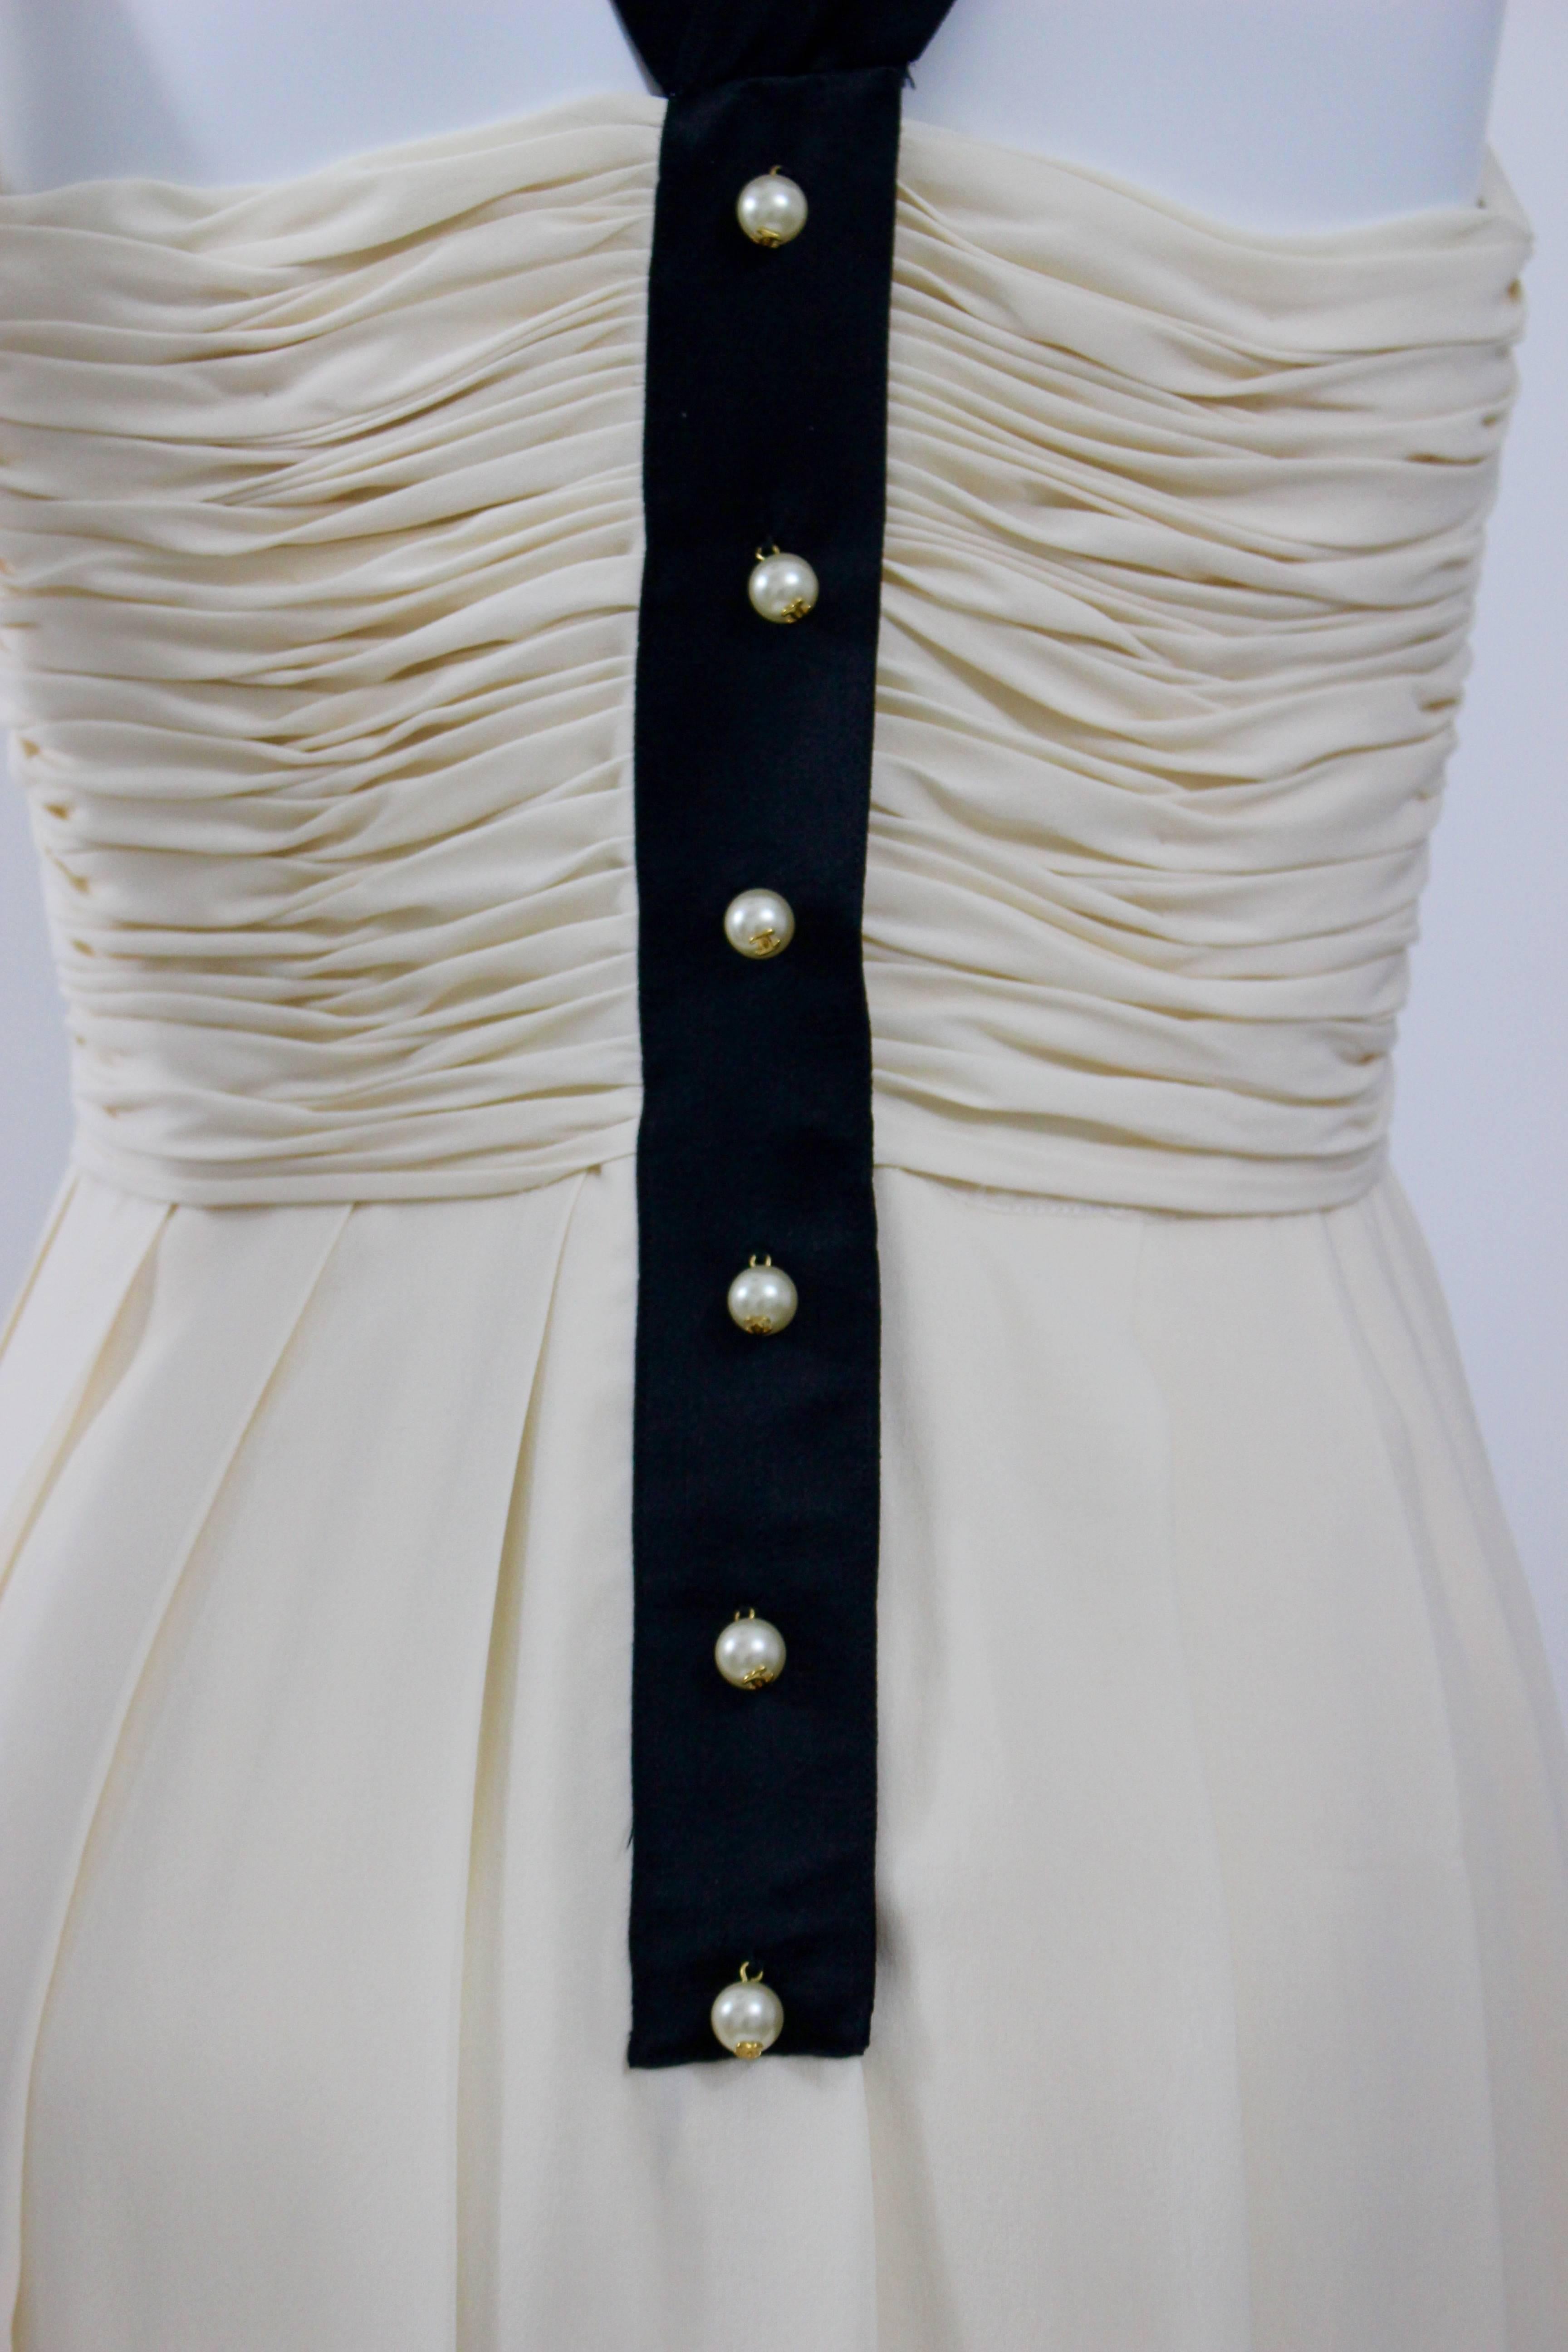 1994 Chanel Ivory Silk chiffon  Ruched Bodice and Pearl Button Dress Vintage 4